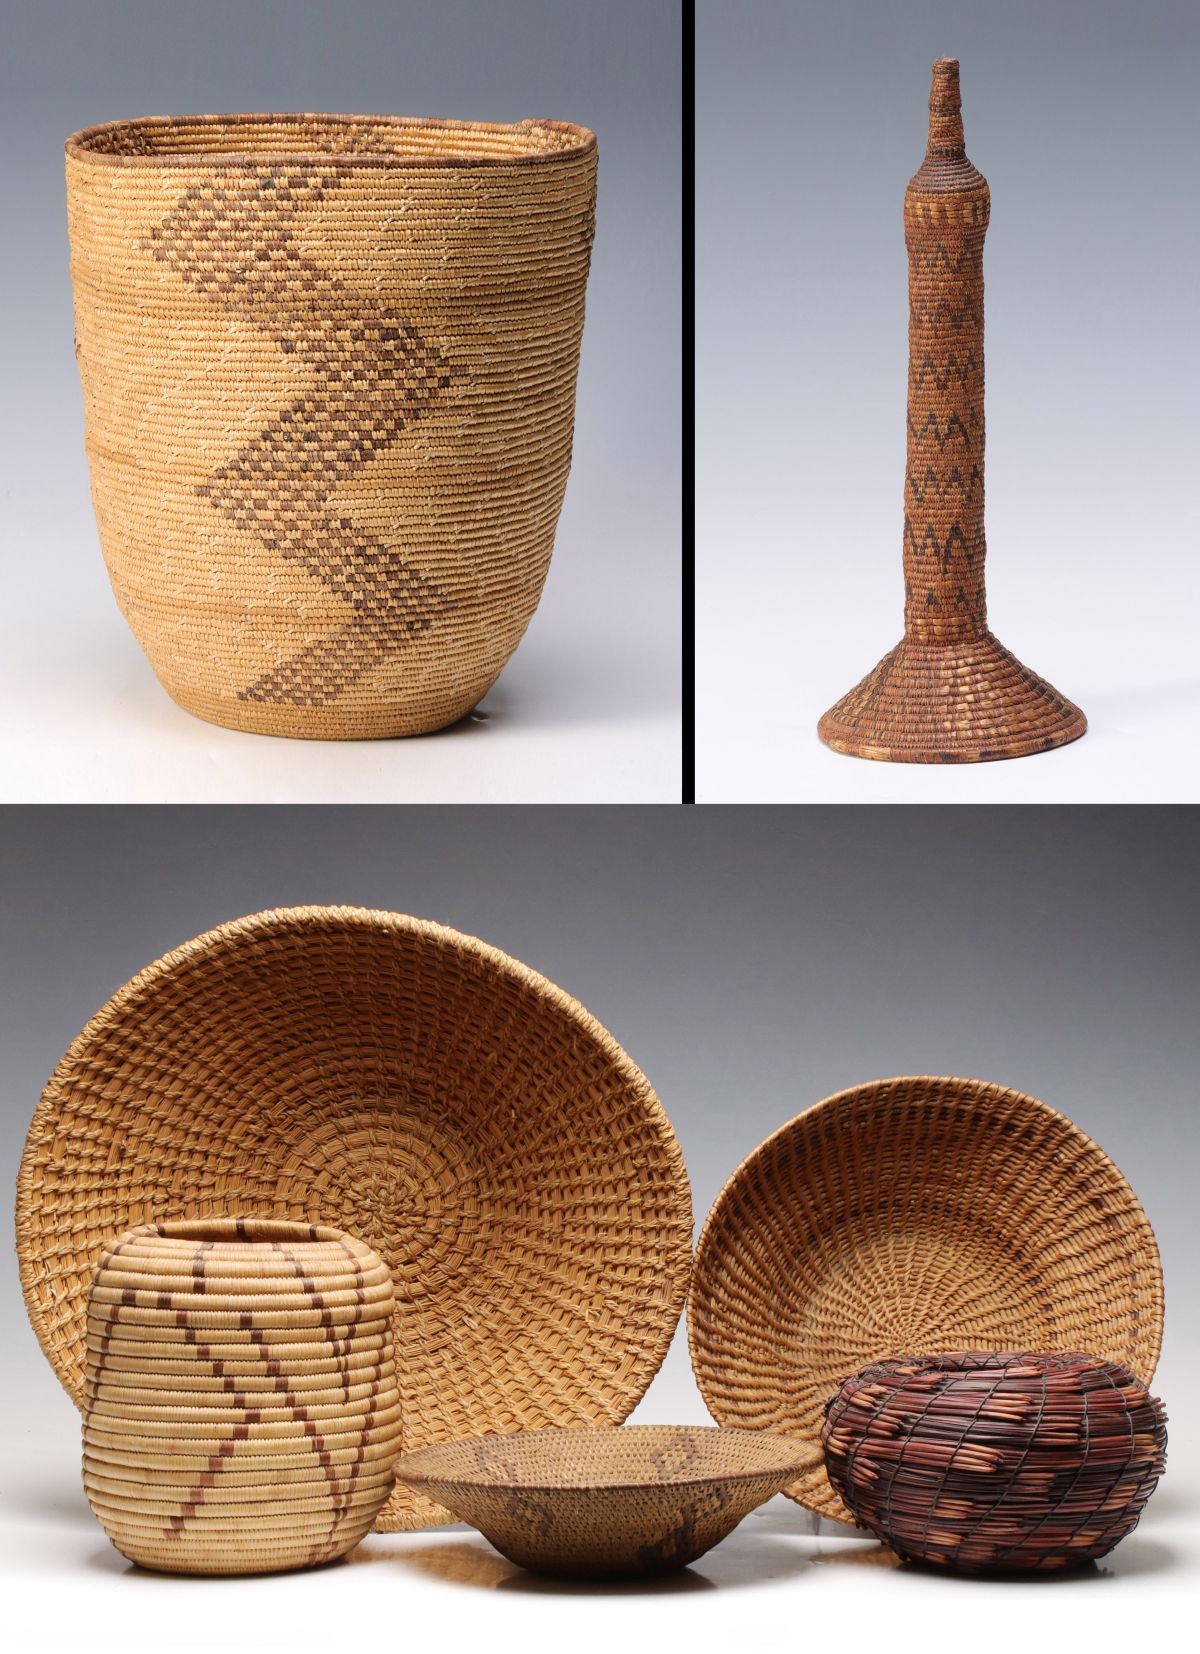 A COLLECTION OF NATIVE AMERICAN AND OTHER BASKETS